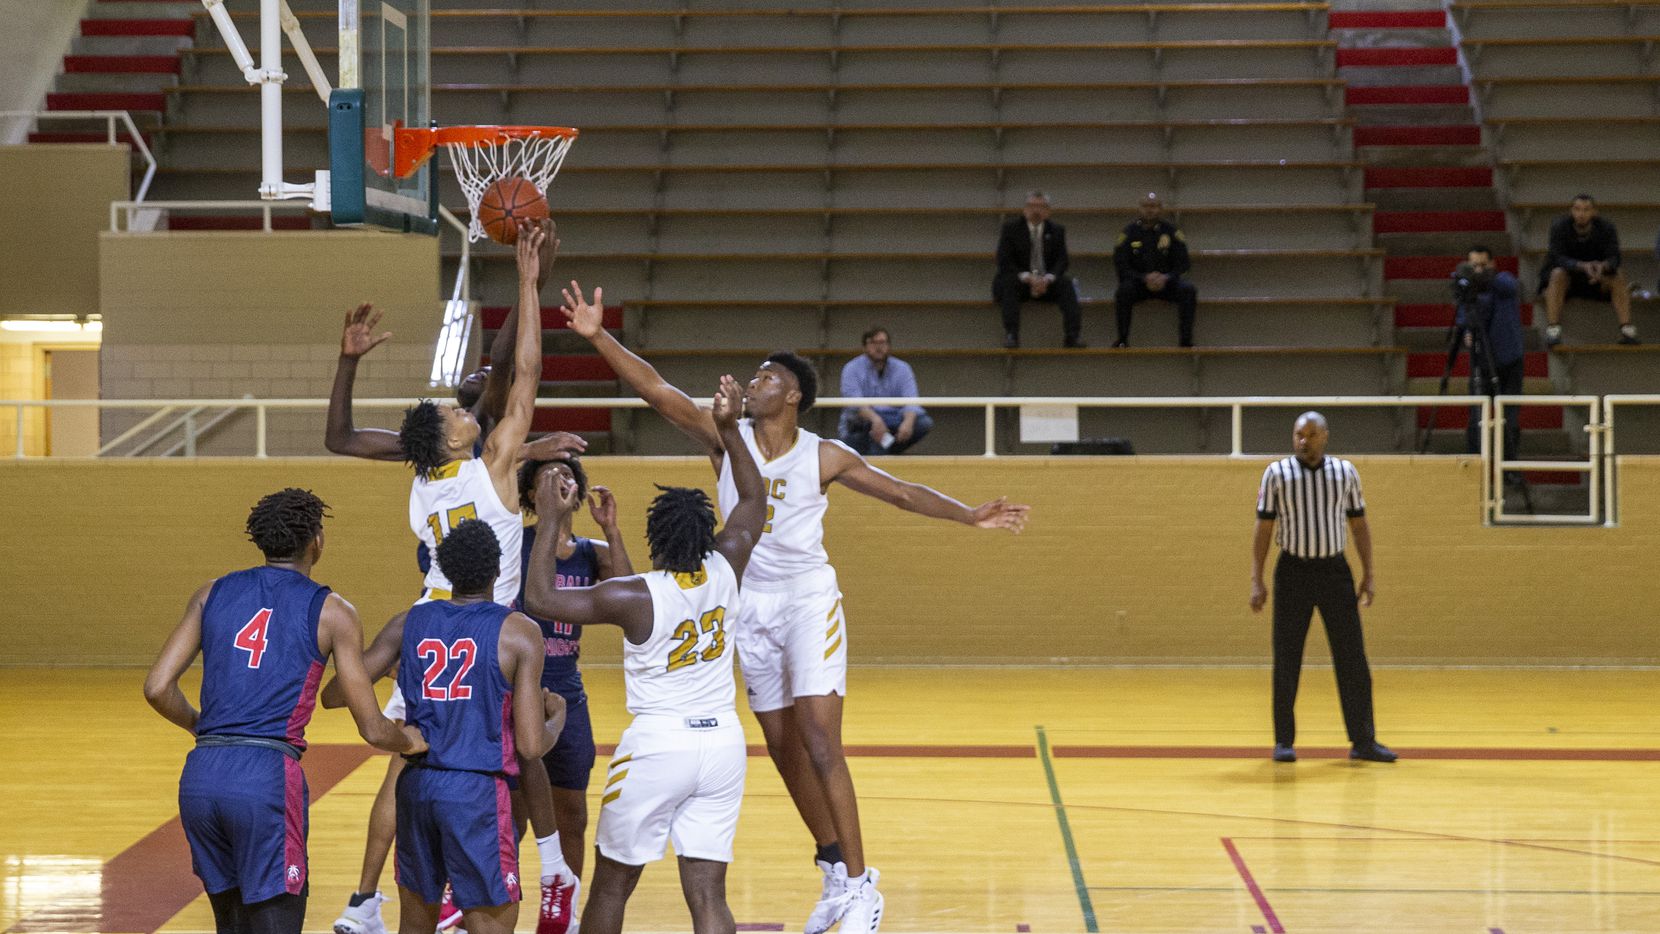 The resumption of the boys basketball game between South Oak Cliff and Kimball plays out...